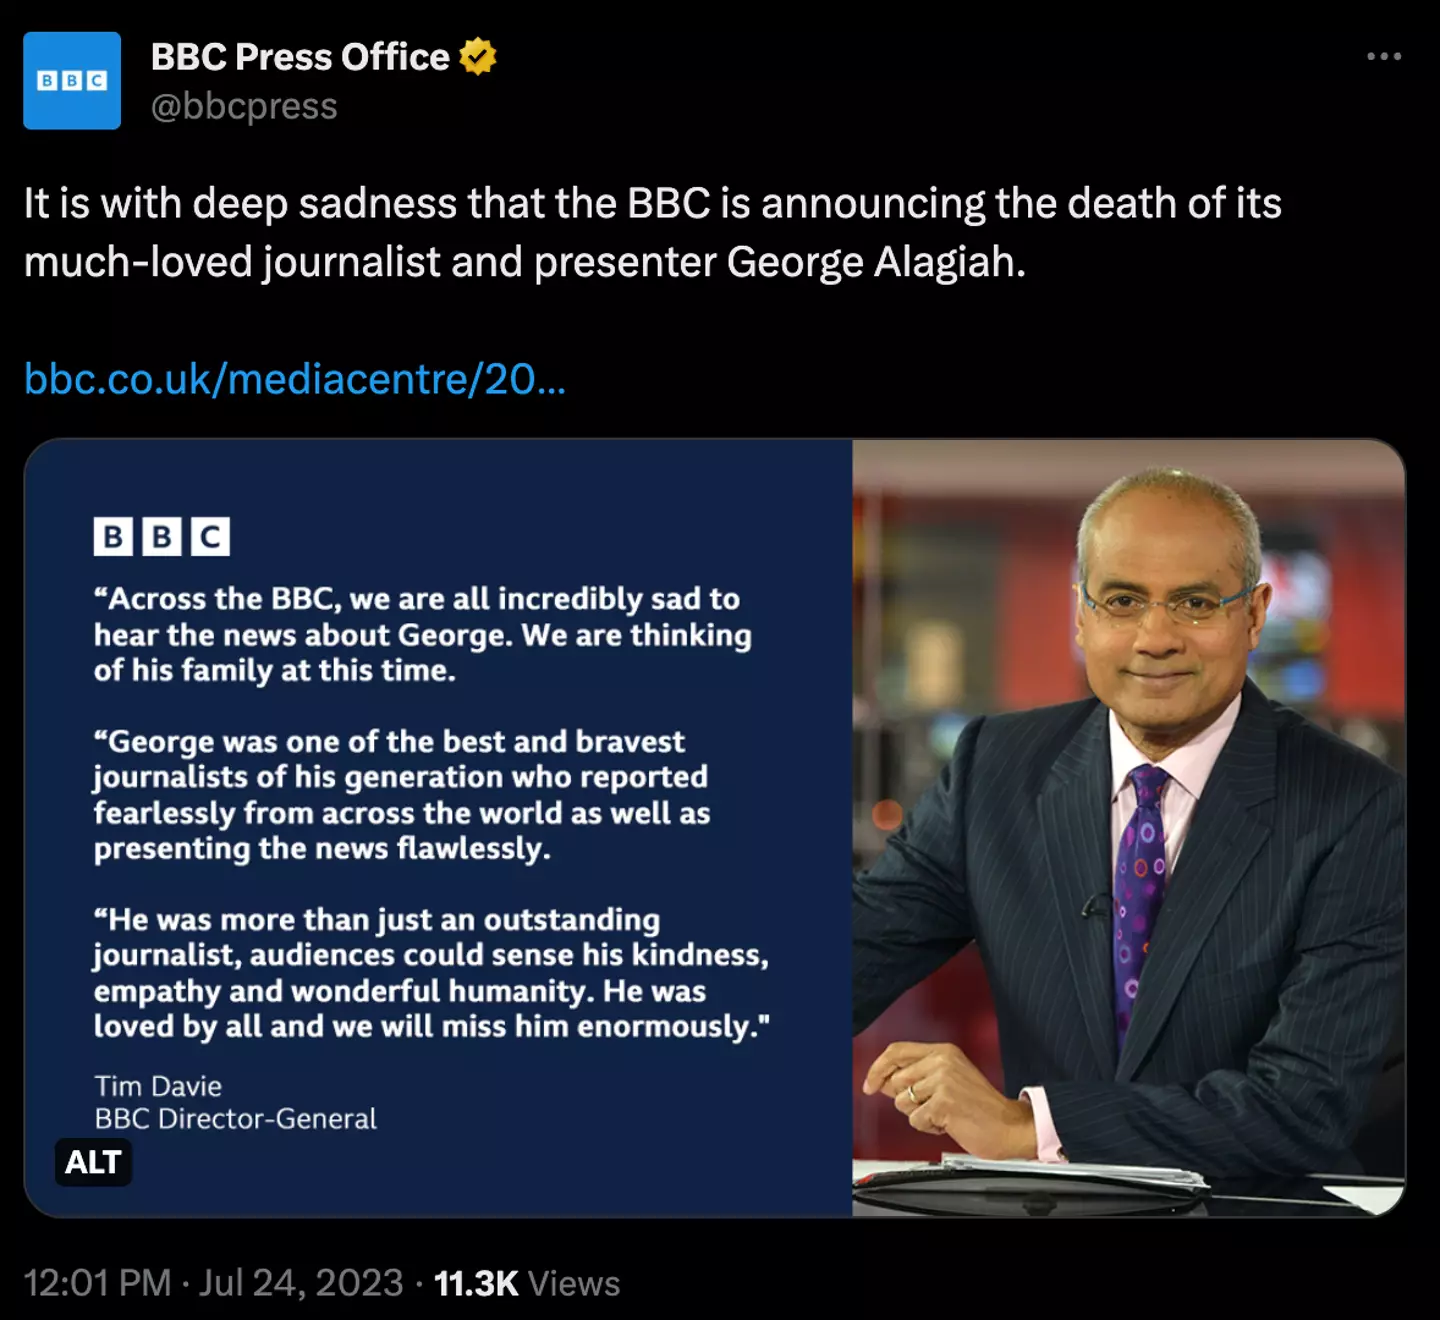 The BBC has addressed the loss of one of it's much-loved journalists and presenters.